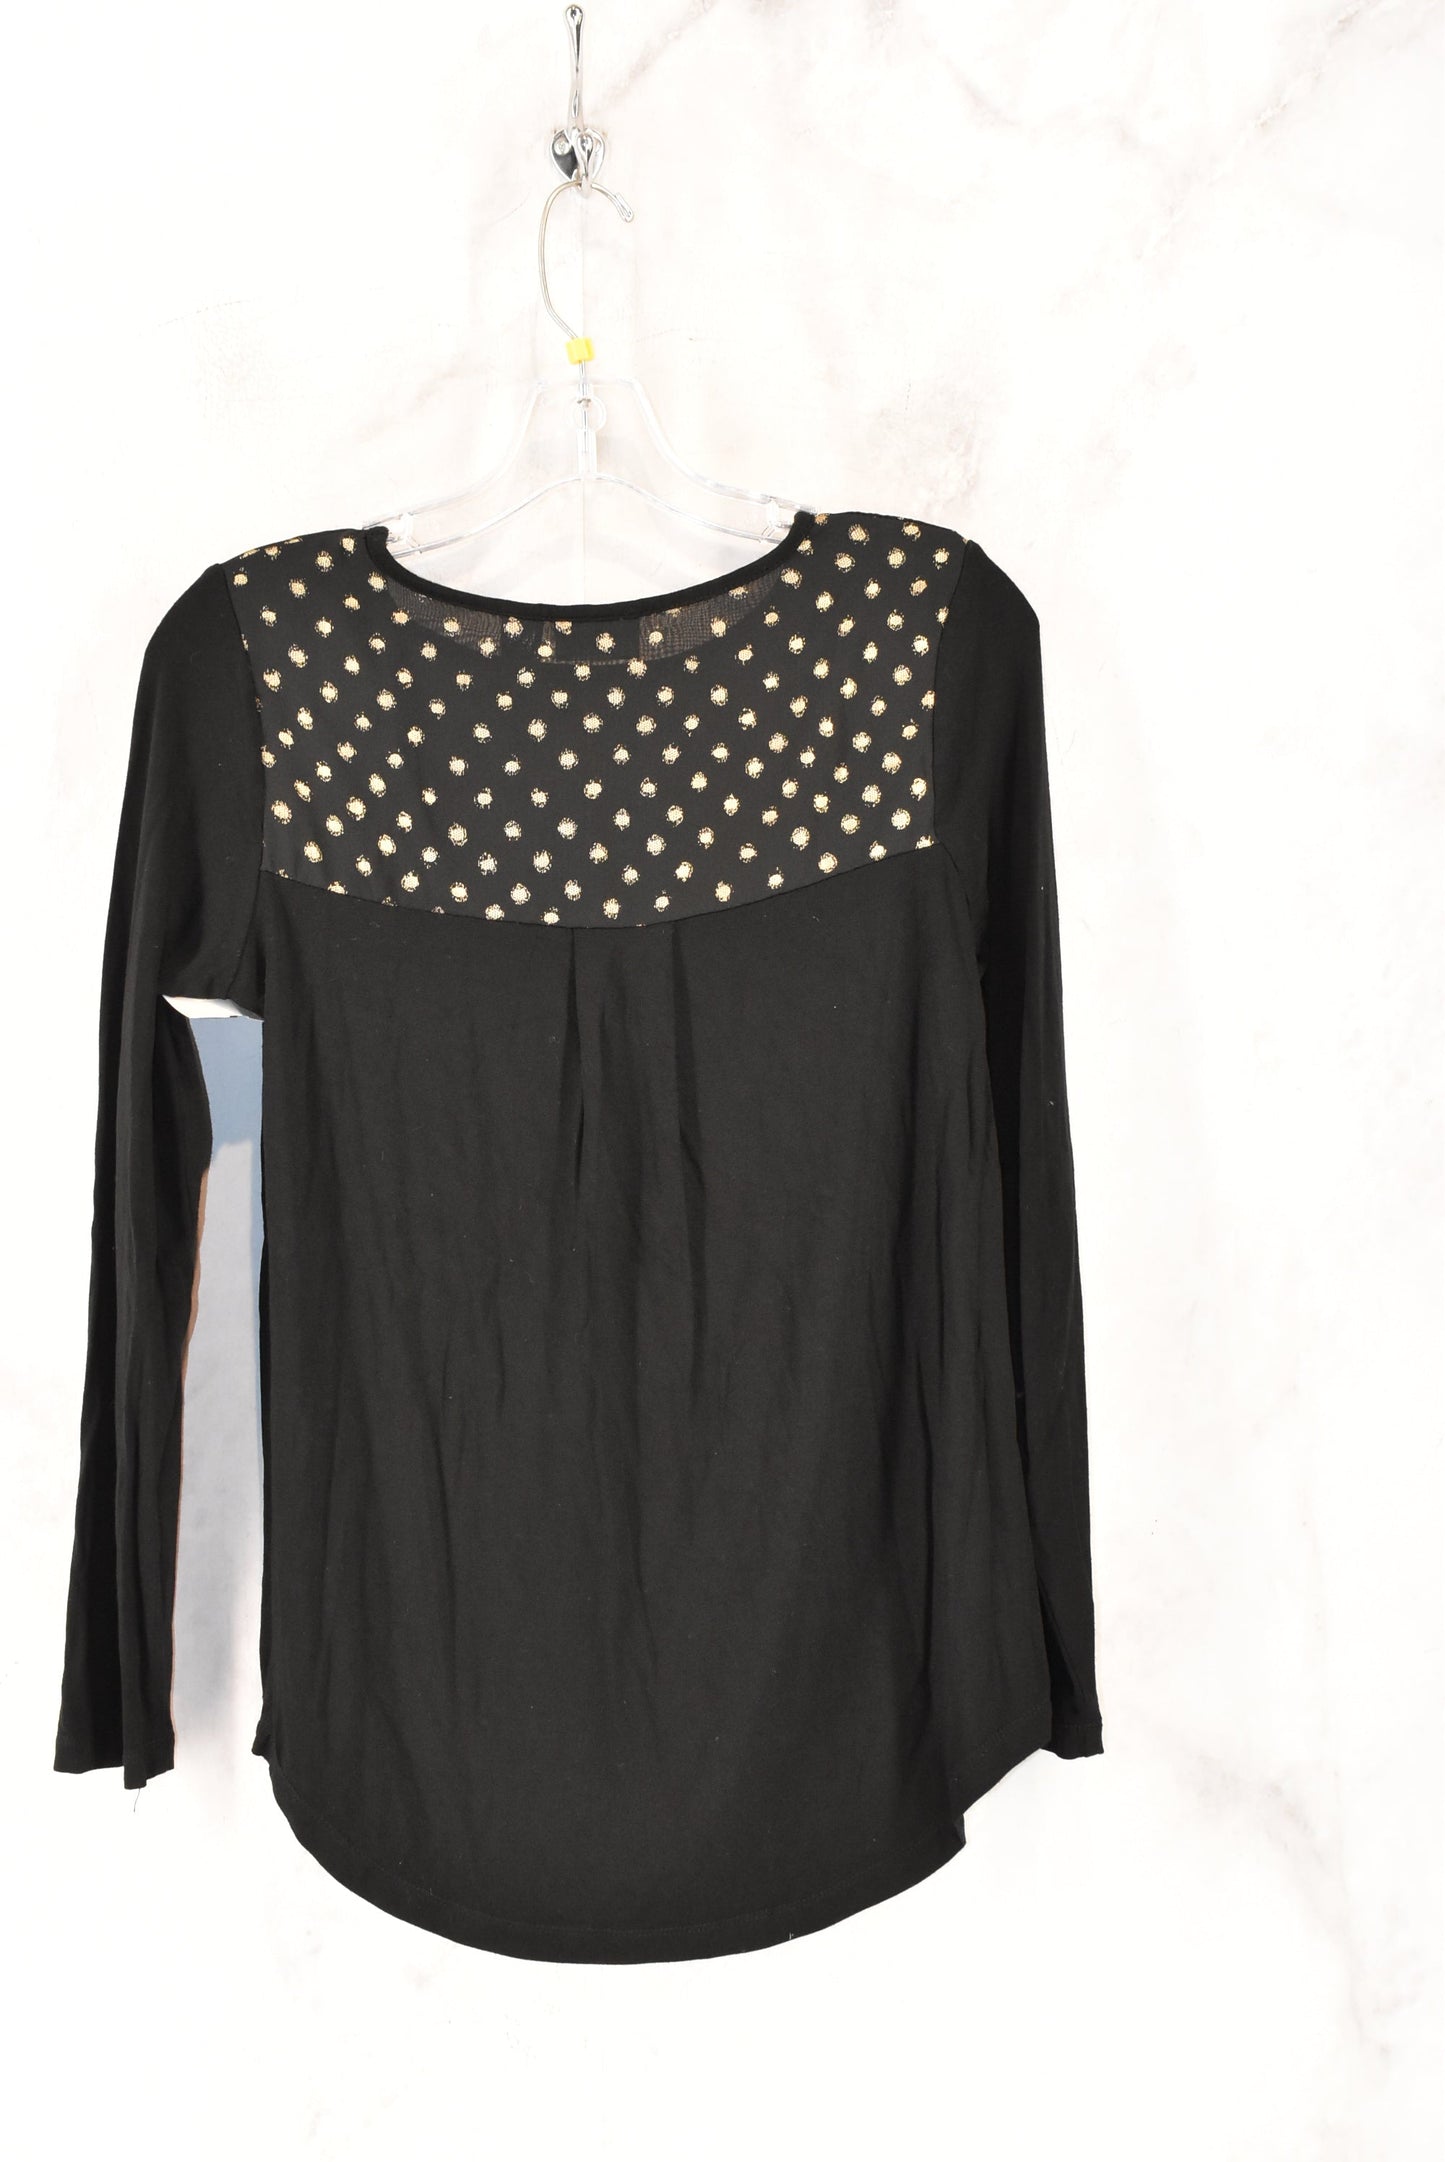 Top Long Sleeve By Chicos  Size: 0